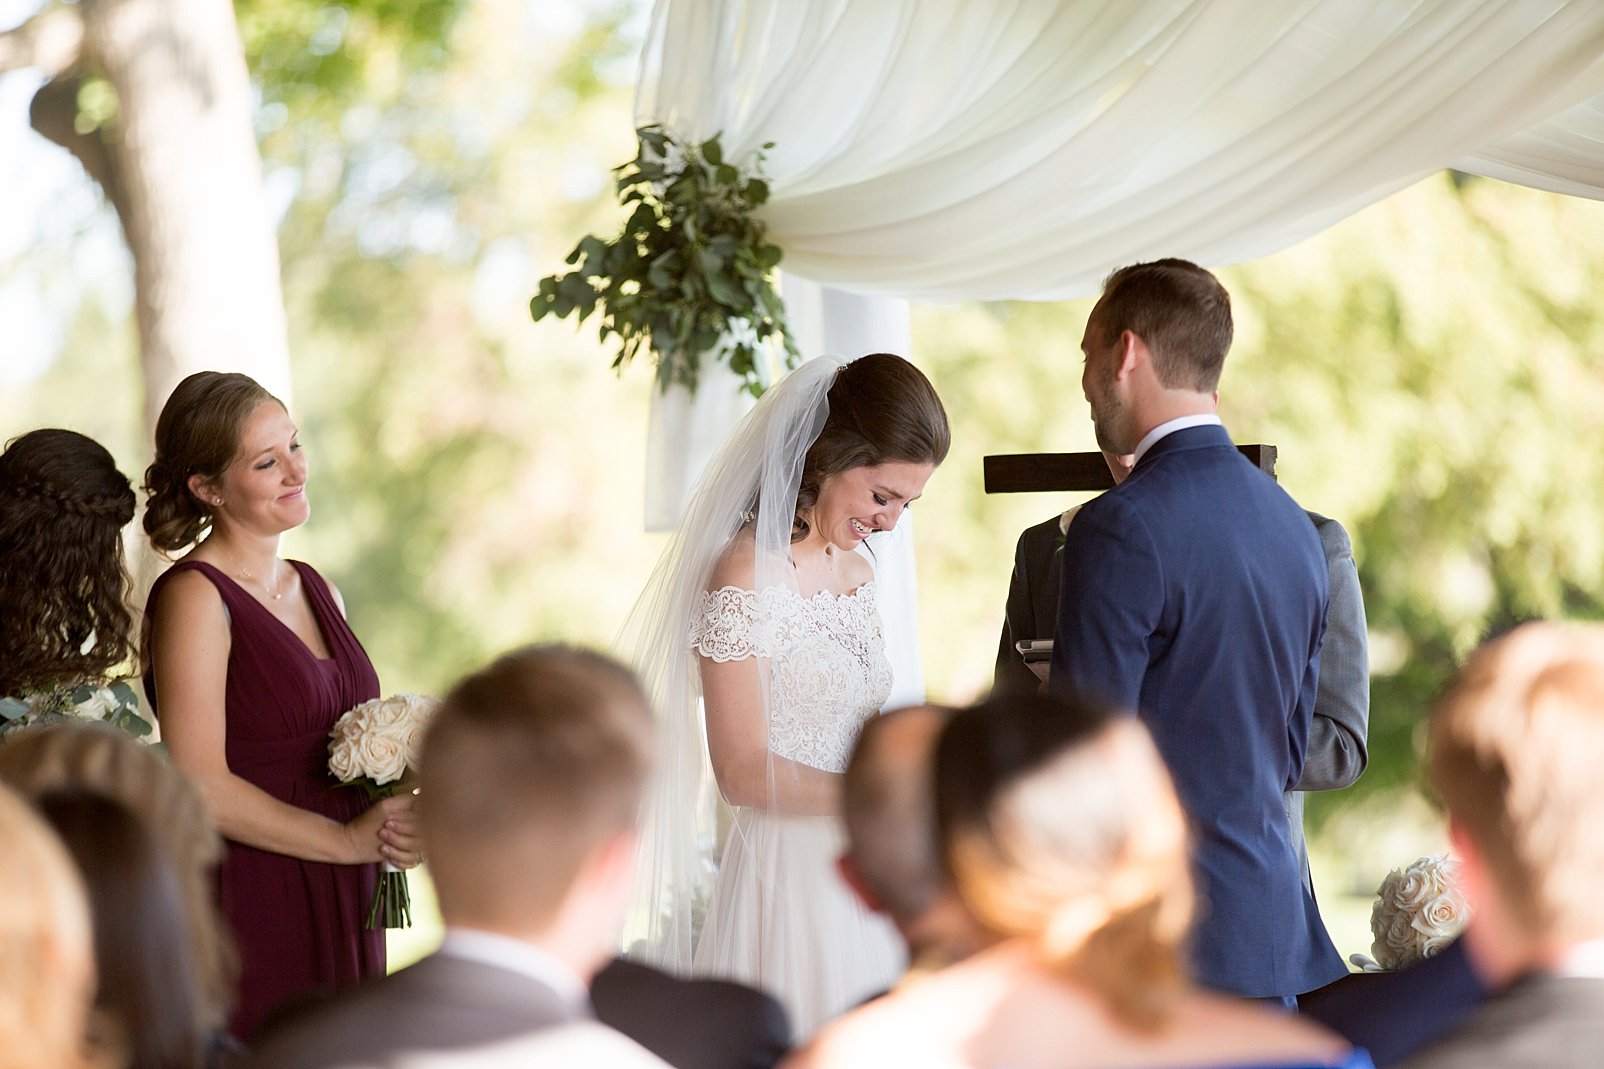 ceremony photos at cherry hills country club wedding photography in denver